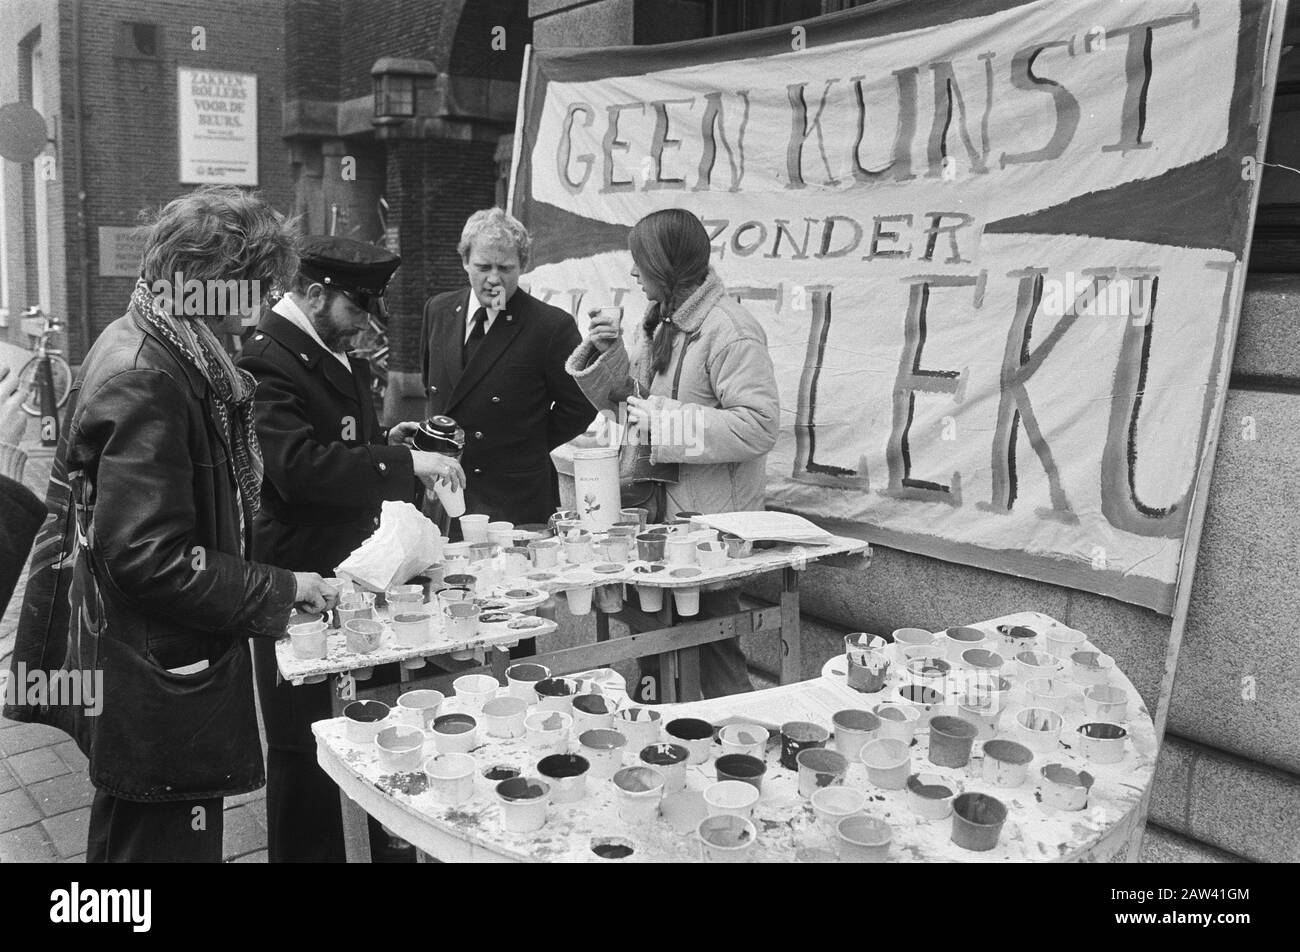 Protest Amsterdam artists' collective kukeleku at City Hall because of impending cessation of subsidy Date: January 21, 1982 Location: Amsterdam, Noord-Holland Keywords: ARTISTS, protests, town halls Stock Photo